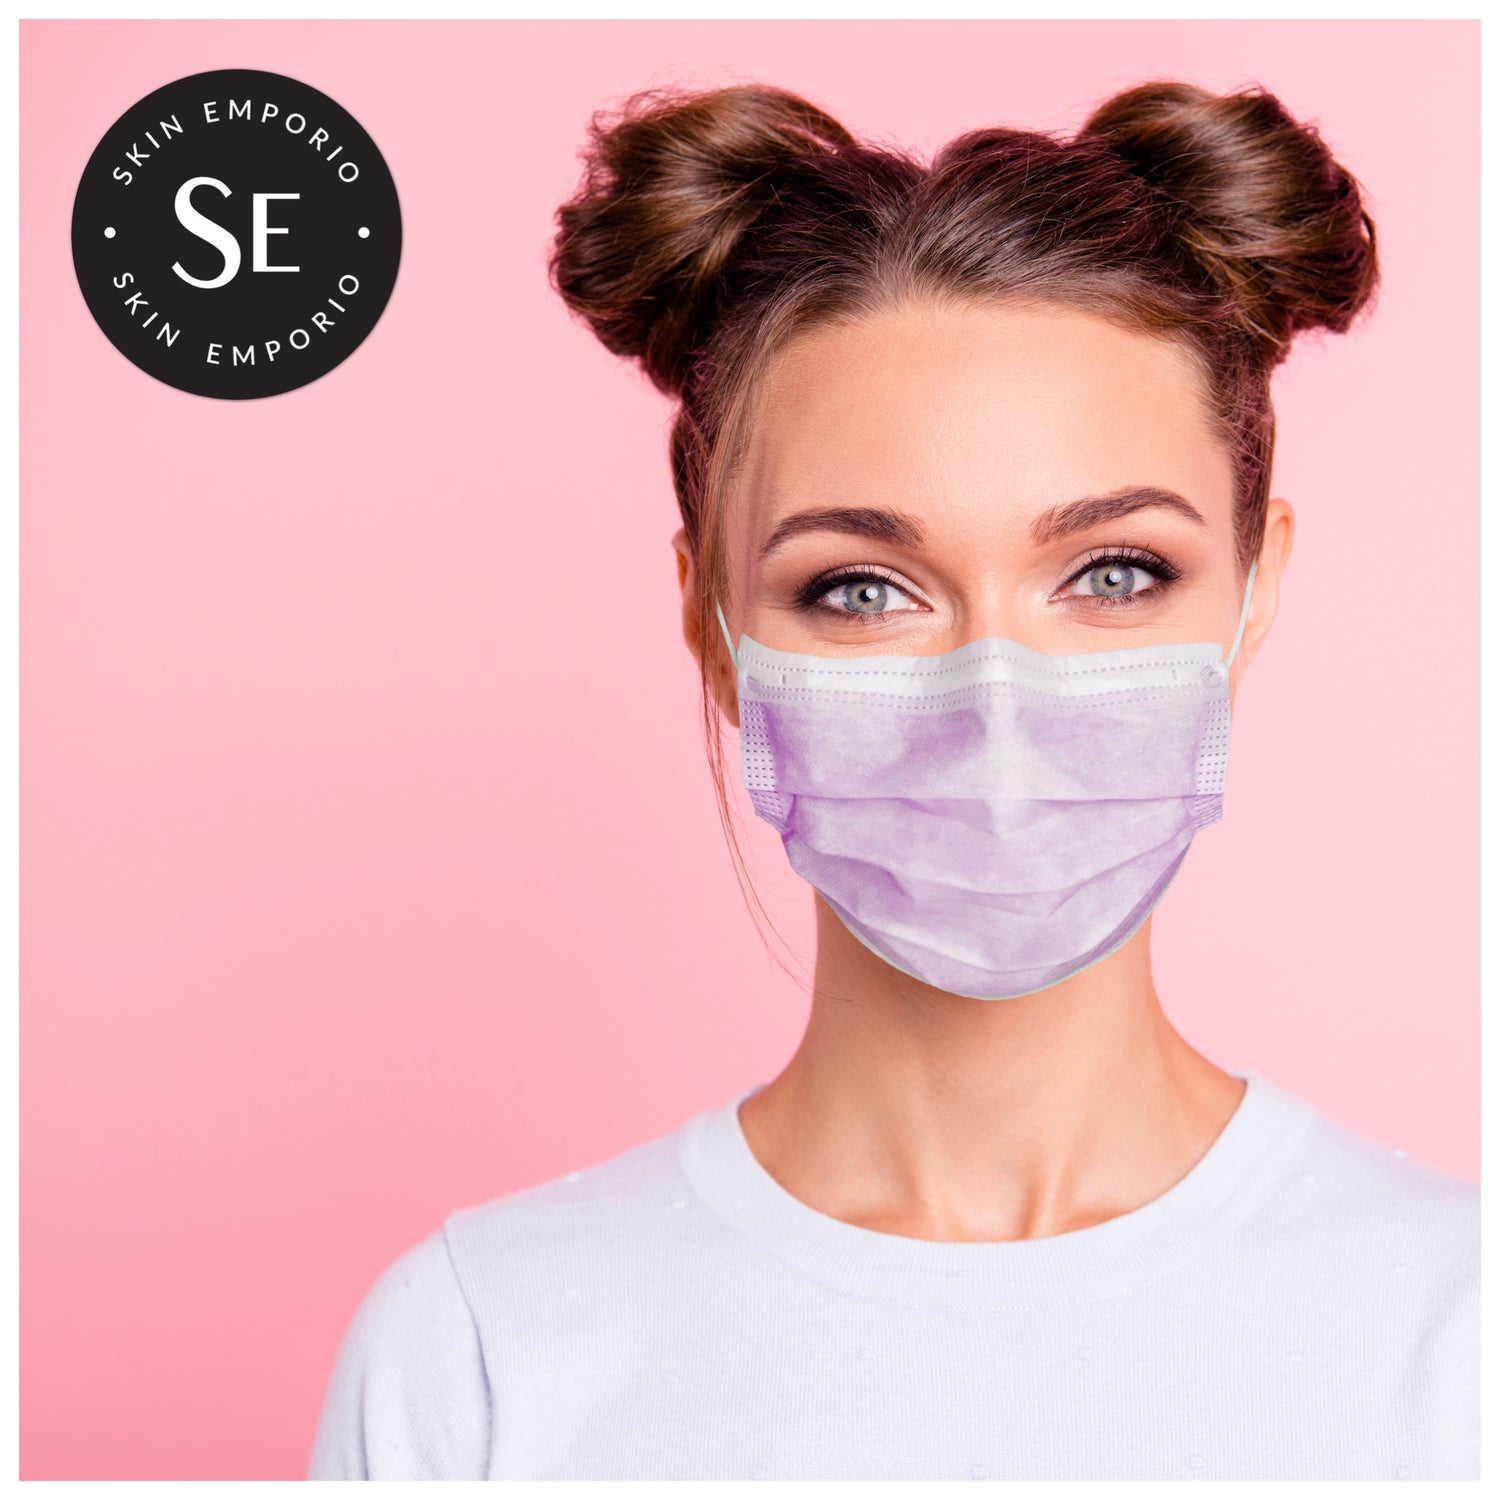 Are face masks and facial coverings causing havoc for your skin?